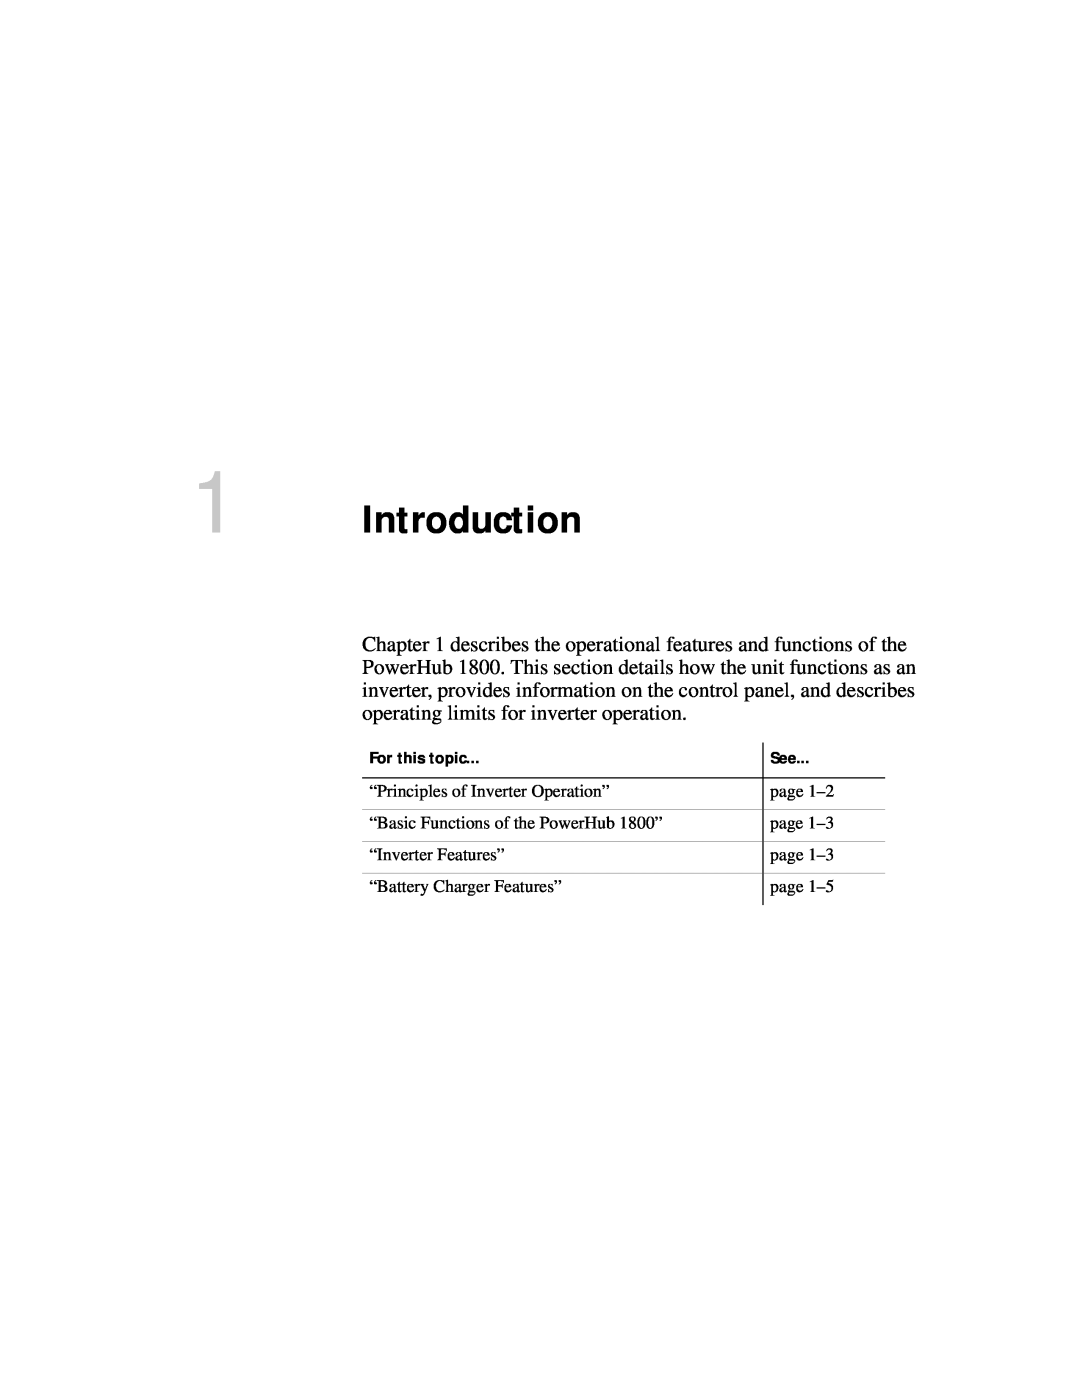 Xantrex Technology PH1800 manual Introduction, For this topic 